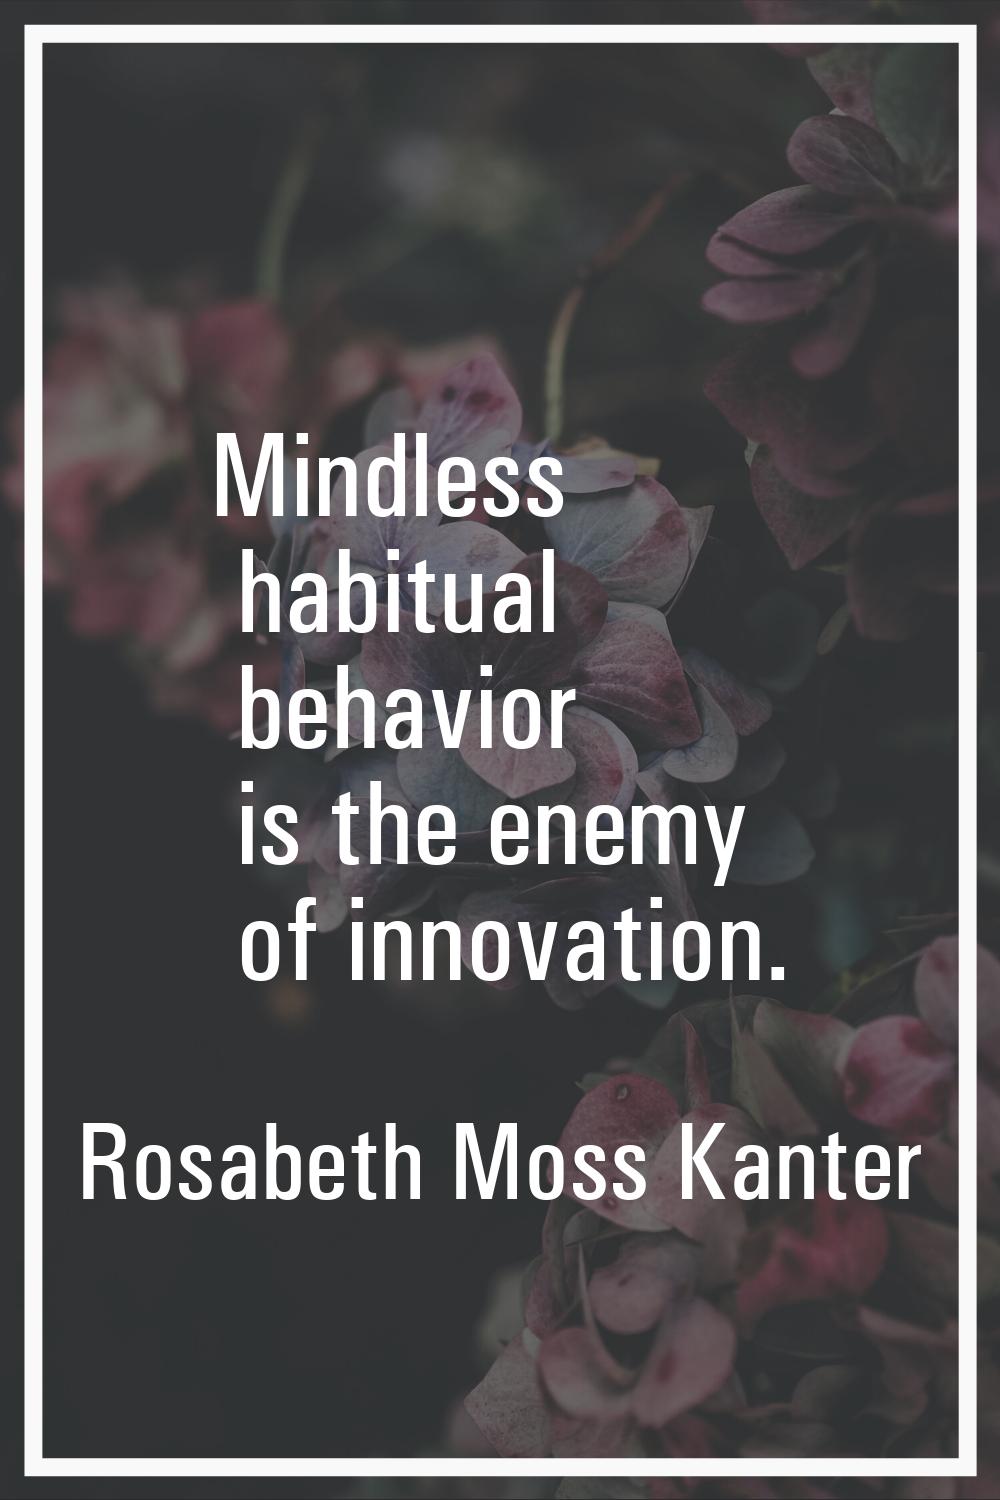 Mindless habitual behavior is the enemy of innovation.